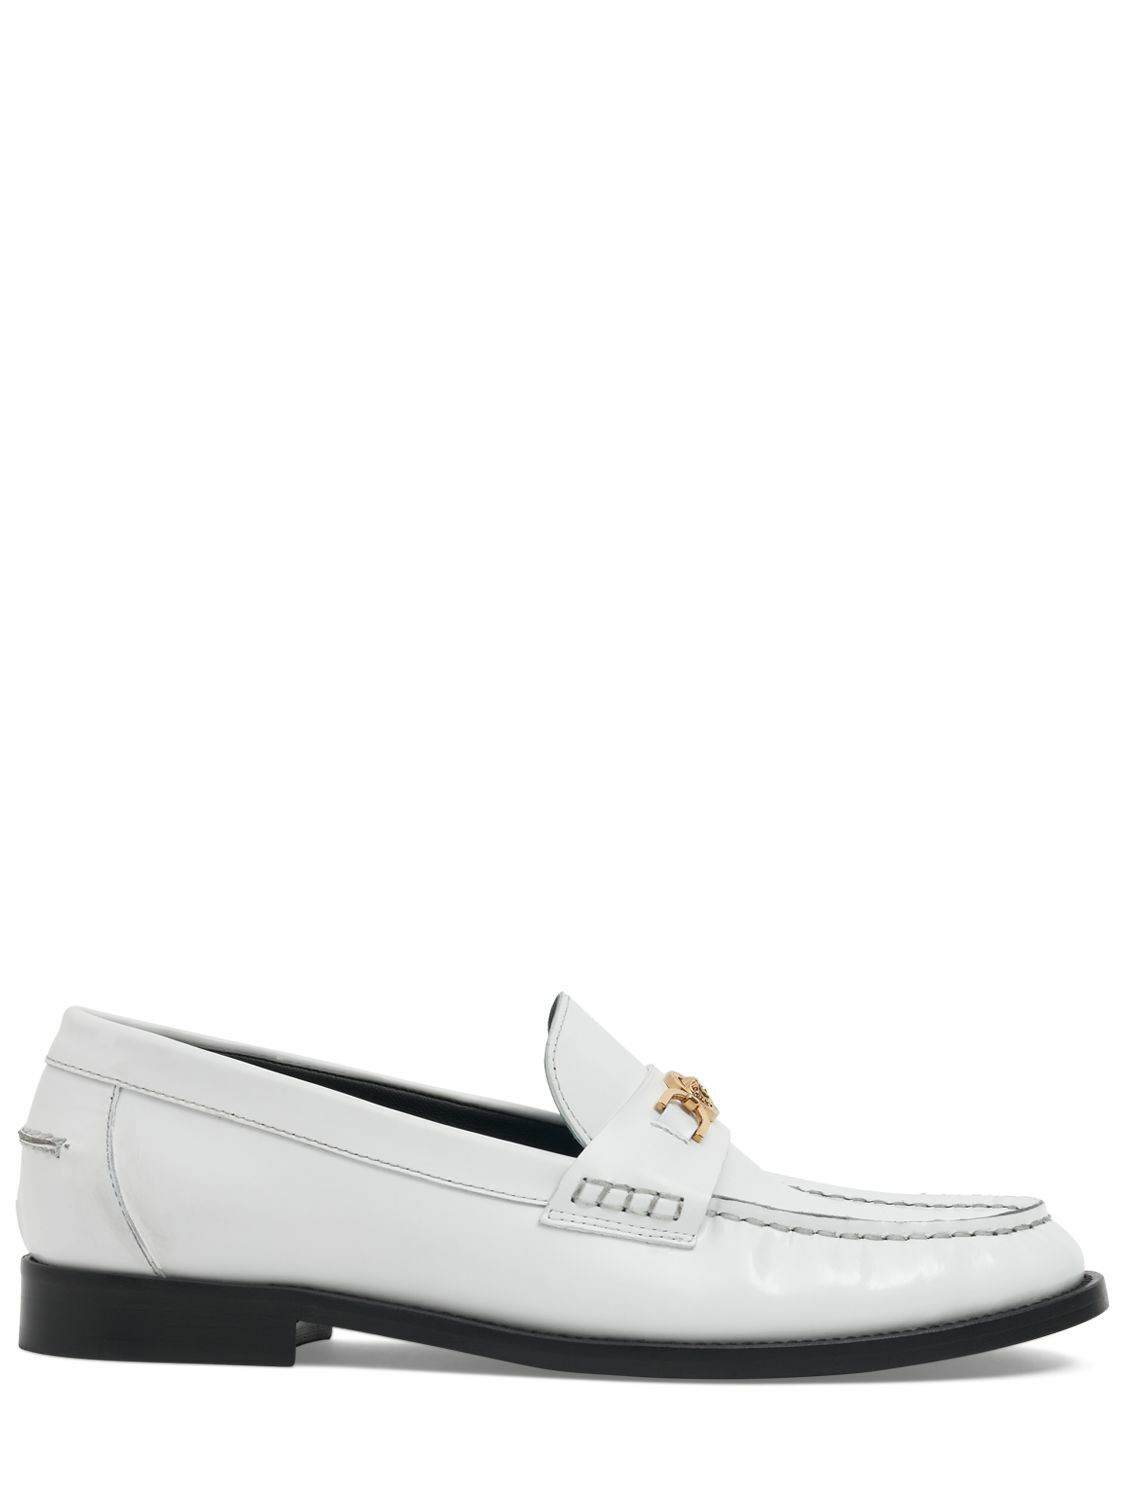 Photo: VERSACE - 20mm Leather Loafers